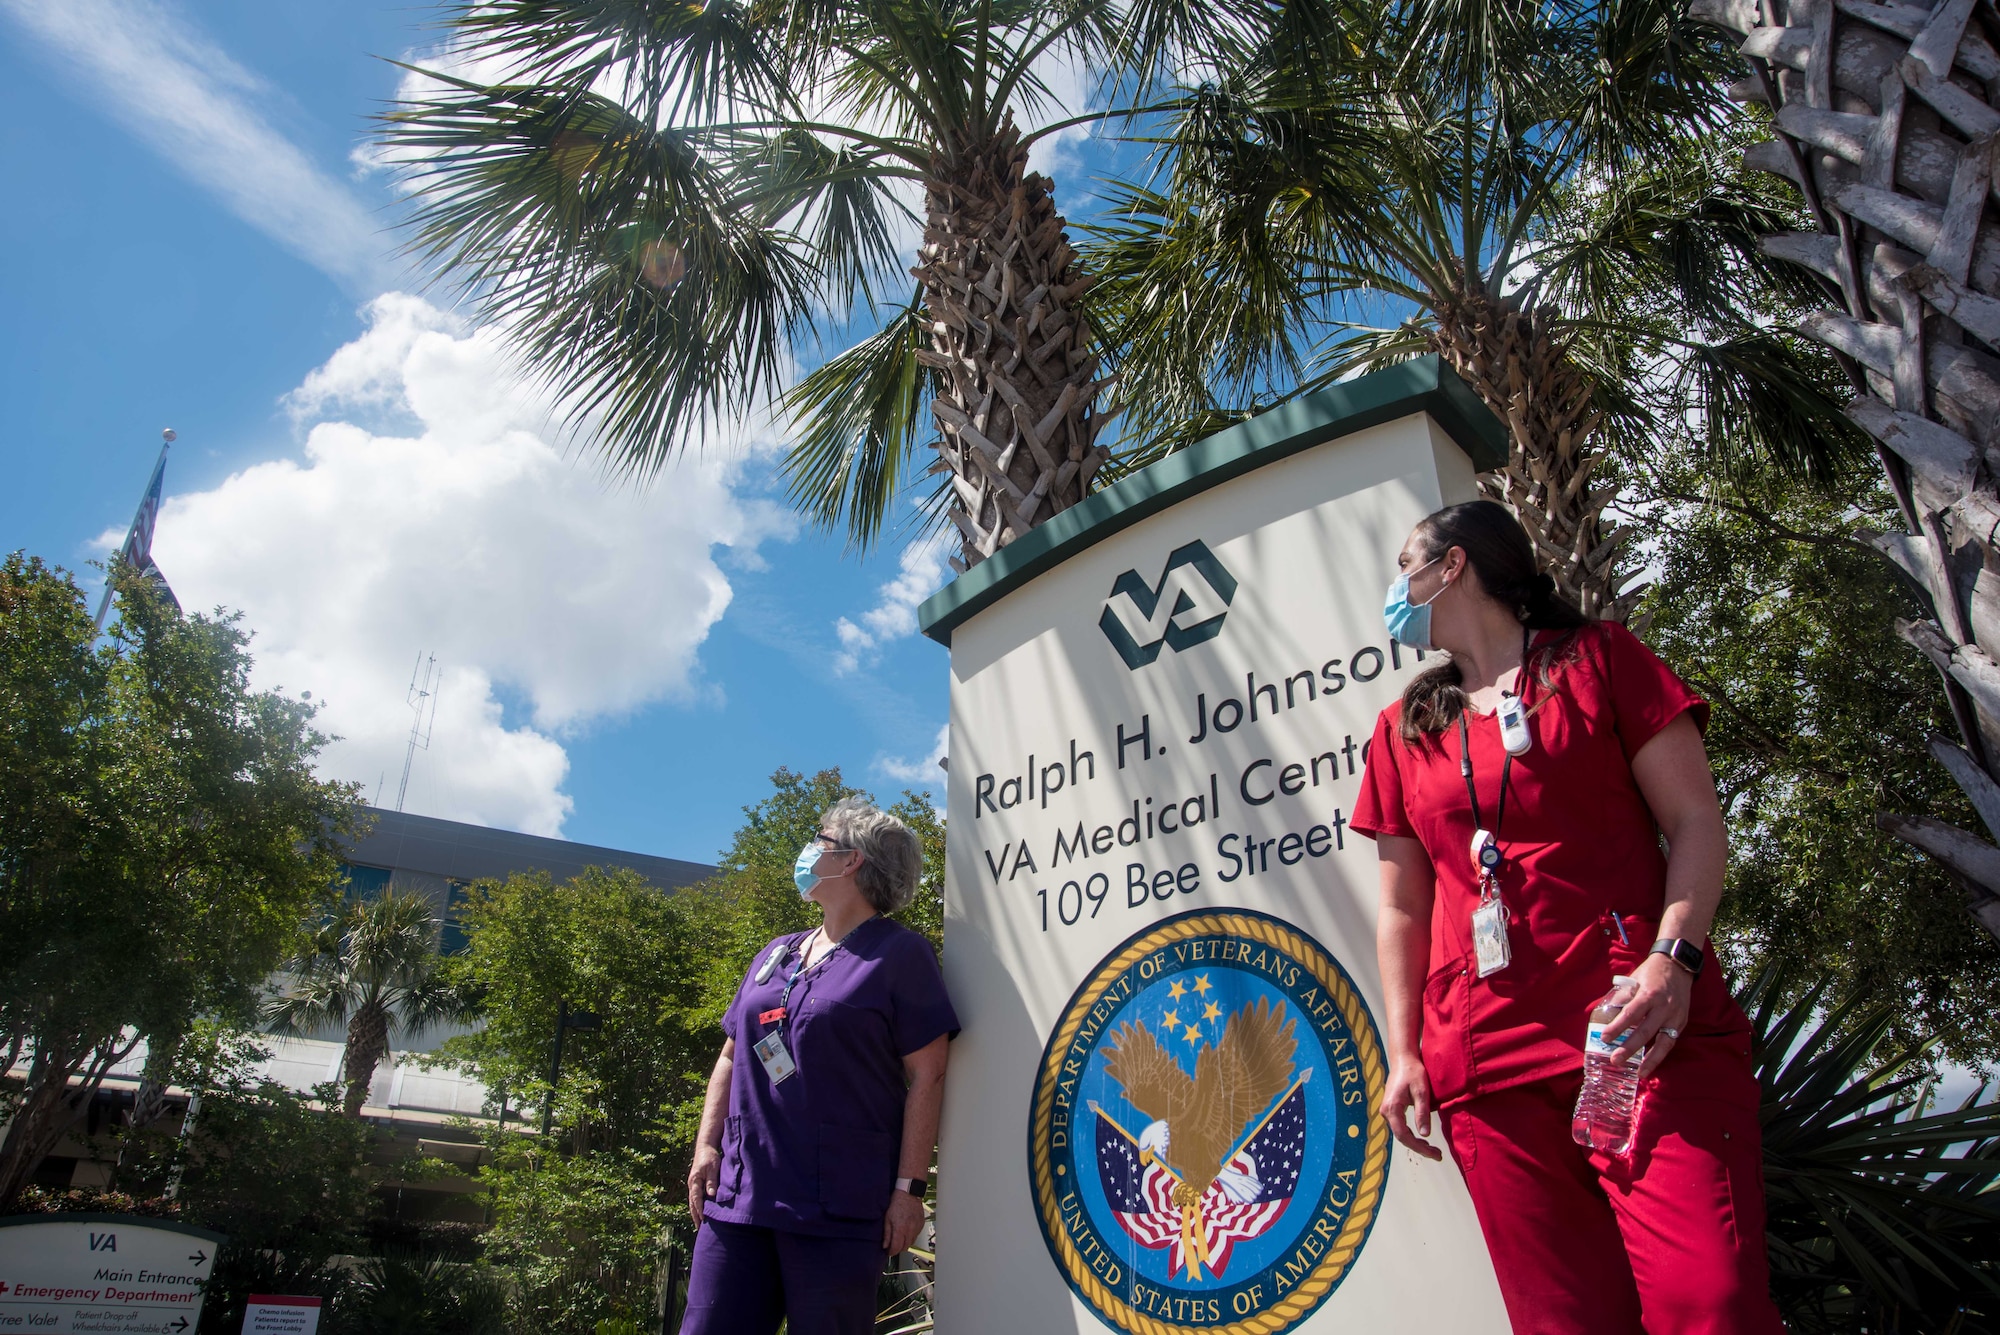 April Cheesebourough and Christina Schenk, VA employees and Air Force spouses, await a flyover saluting healthcare workers in the fight against COVID-19, May 15, 2020, at Ralph H. Johnson VA Medical Center in Charleston, South Carolina. Joint Base Charleston Airmen from the 315th Airlift Wing and 437th Airlift Wing, came together to train during this salute to healthcare workers that flew over several Charleston medical centers.